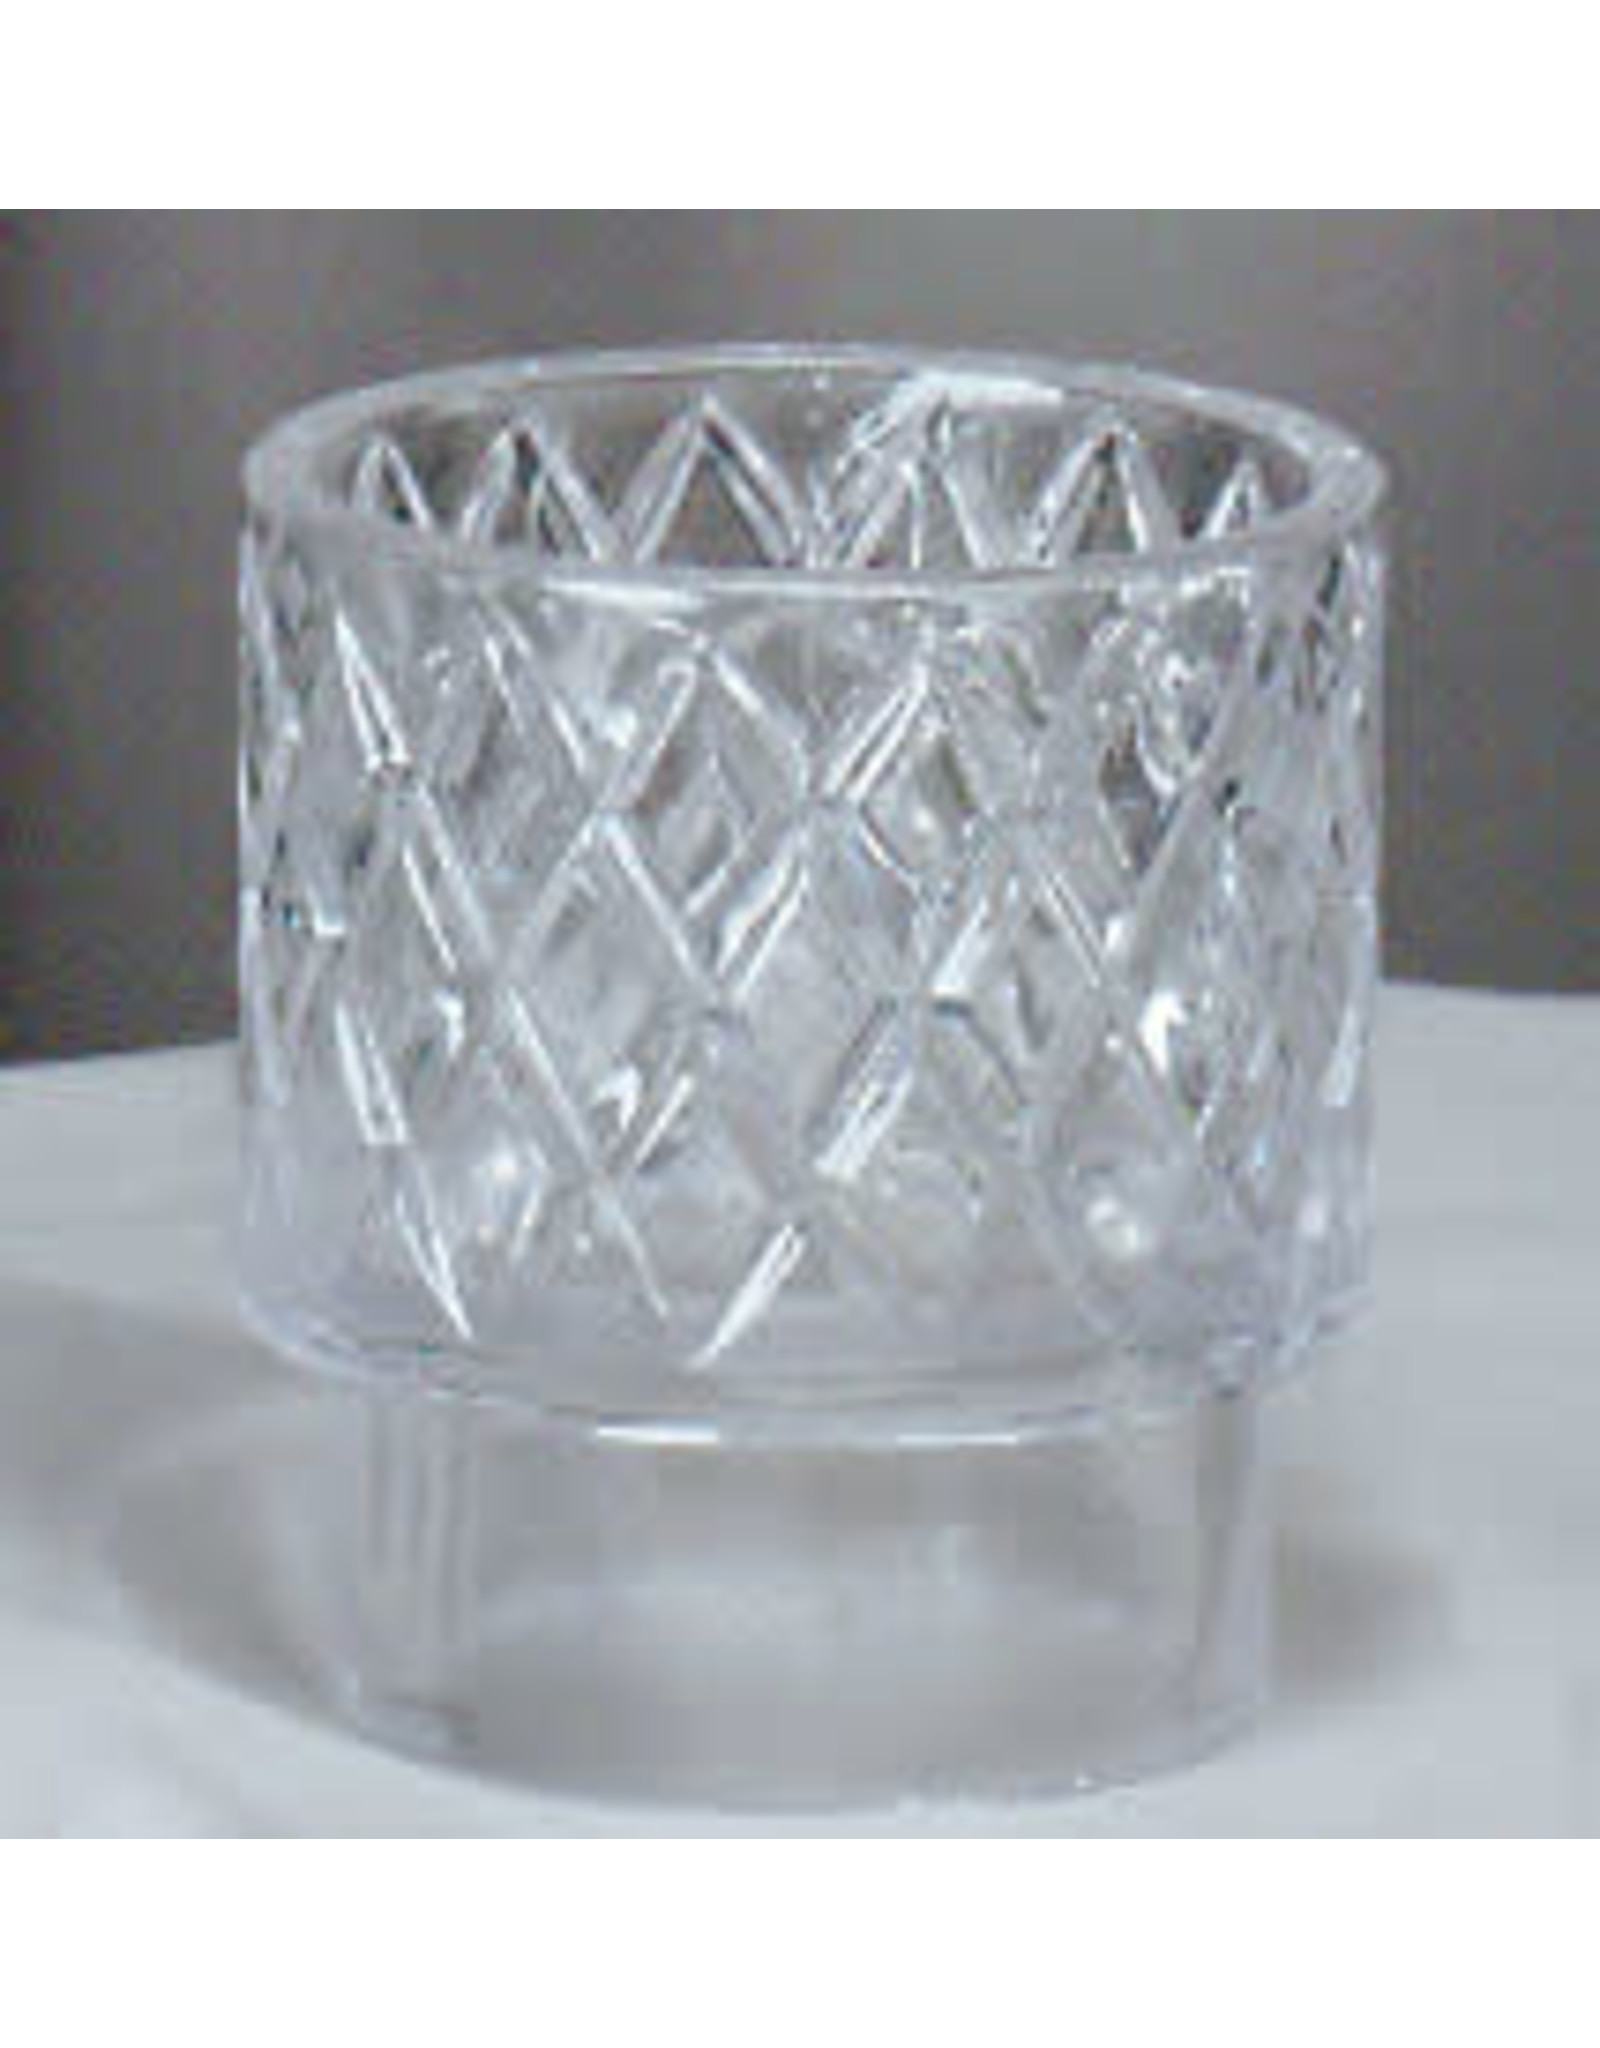 Emkay (Muench-Kreuzer) Crystal Flame Guard for 2-5/8" Oil Candle Shell